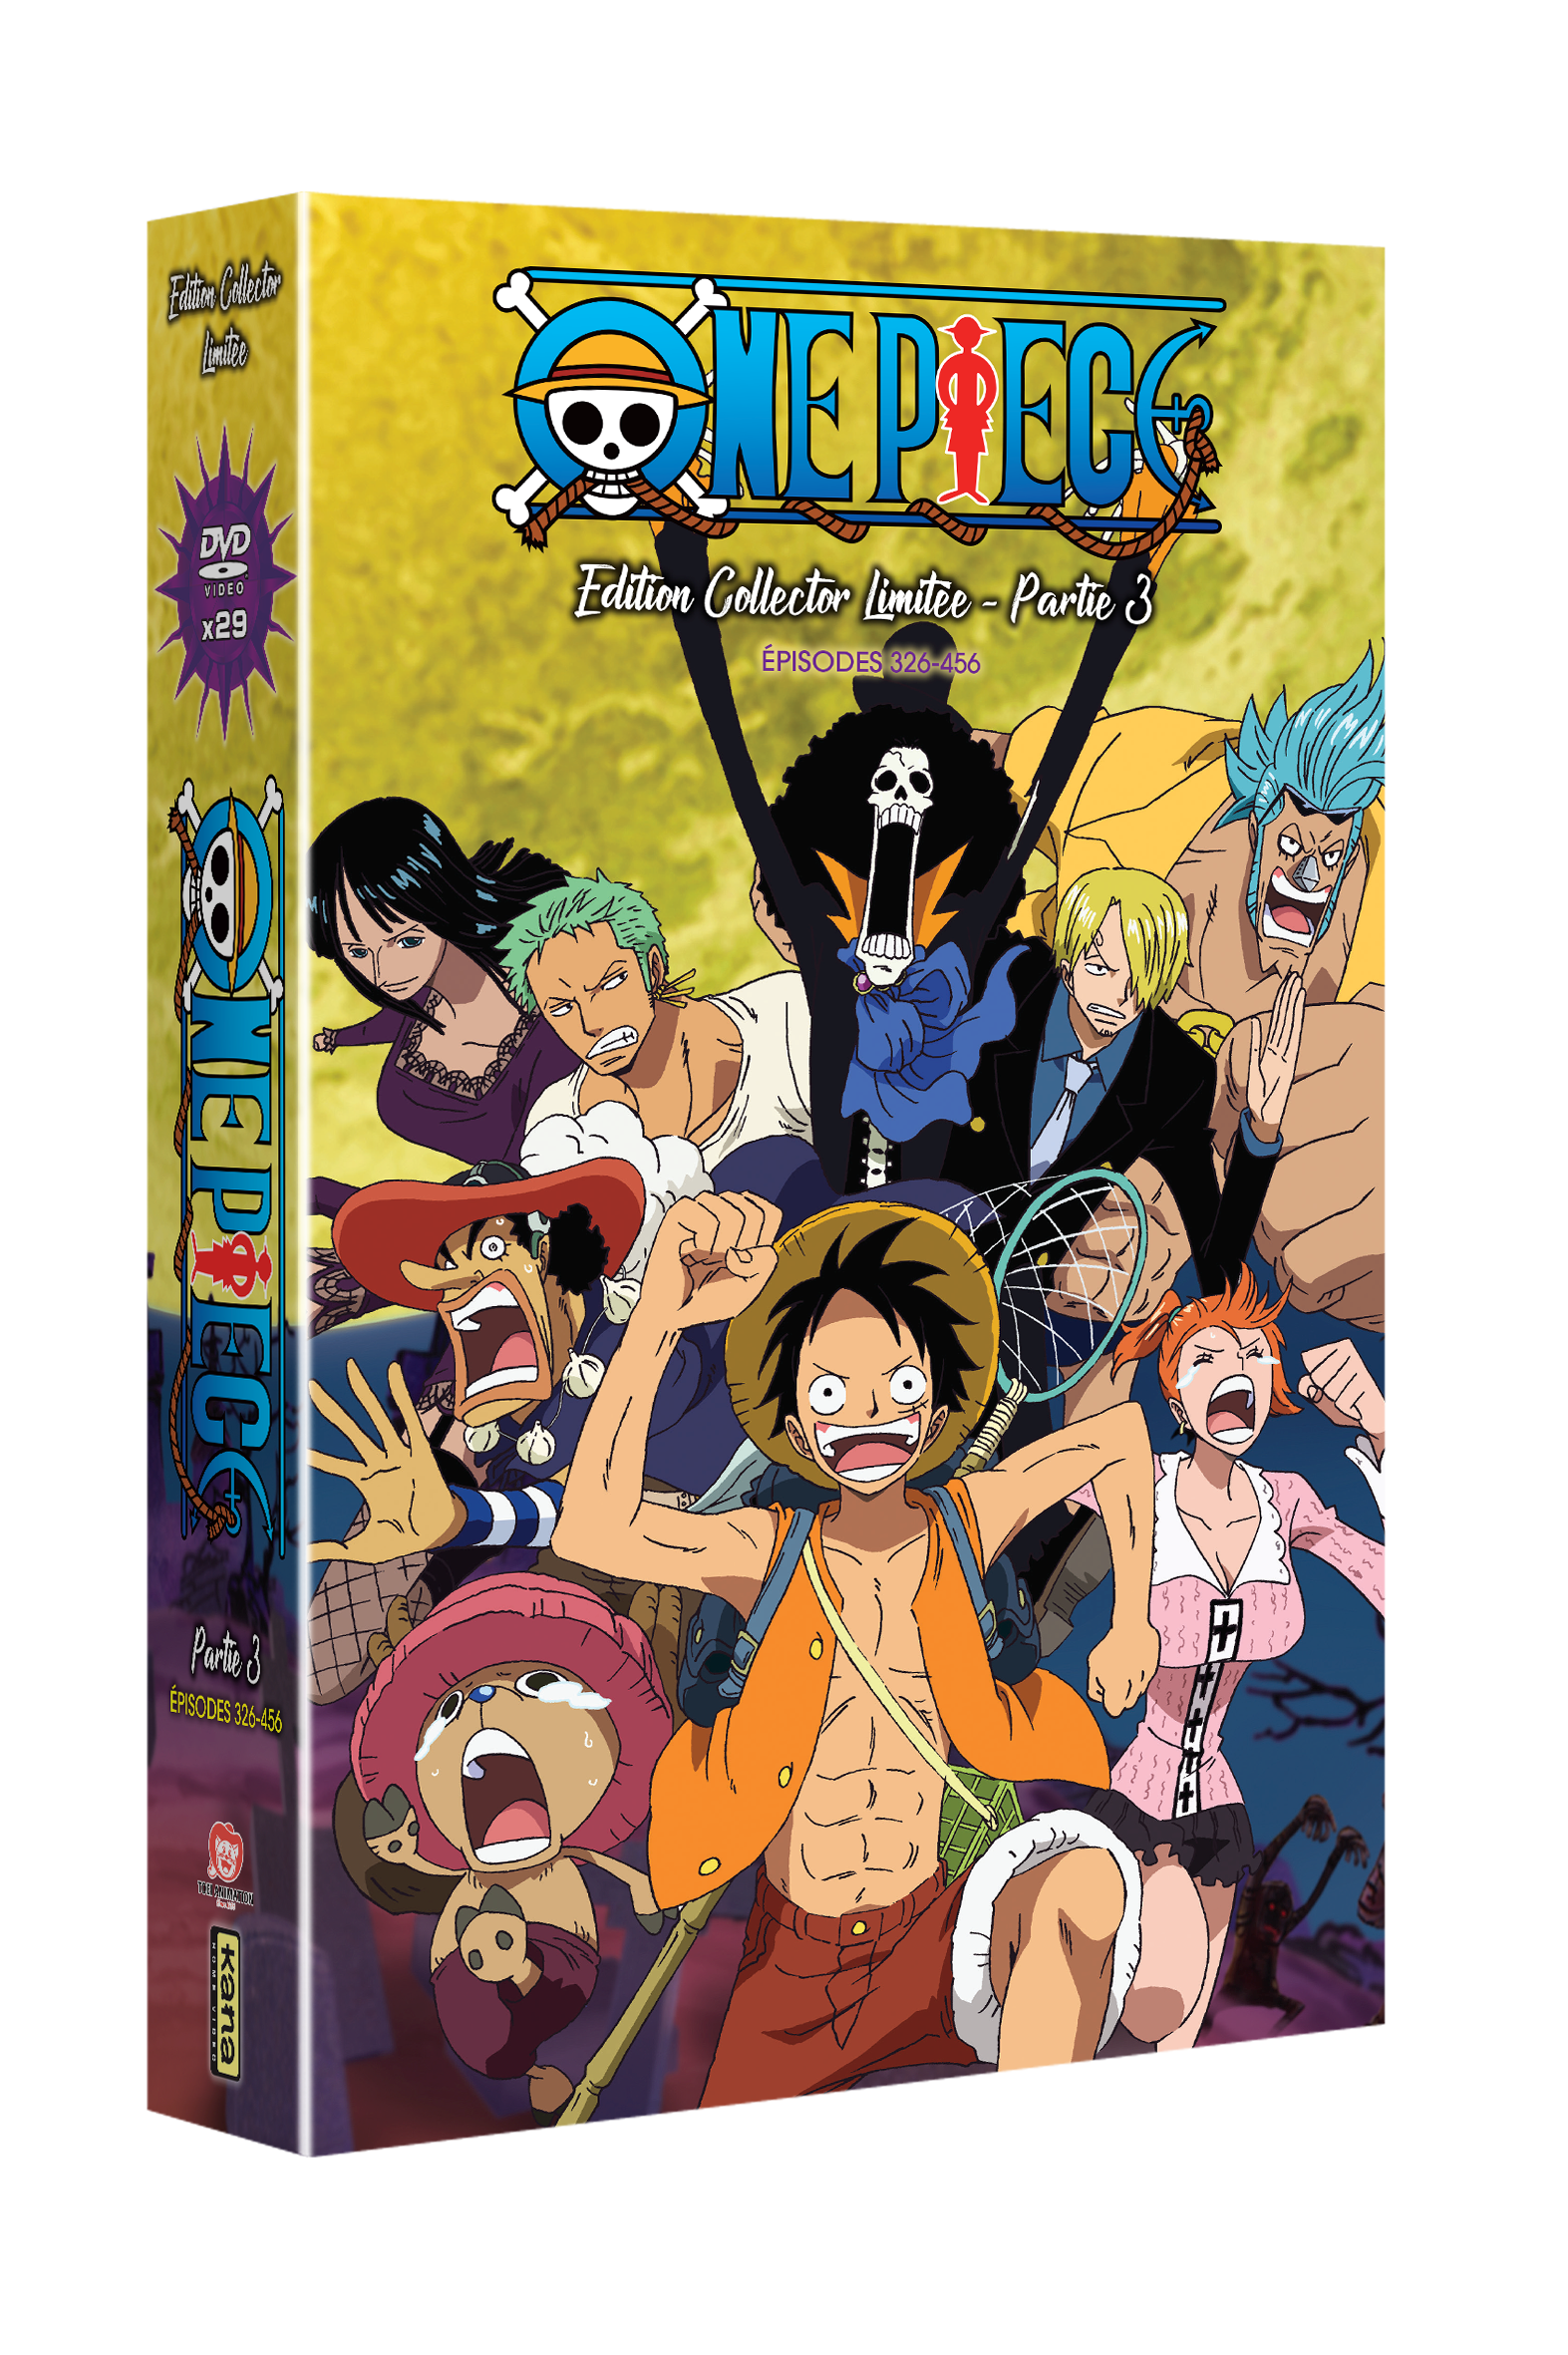 ONE PIECE -  INTEGRALE PARTIE 3 - EDITION COLLECTOR LIMITEE A4